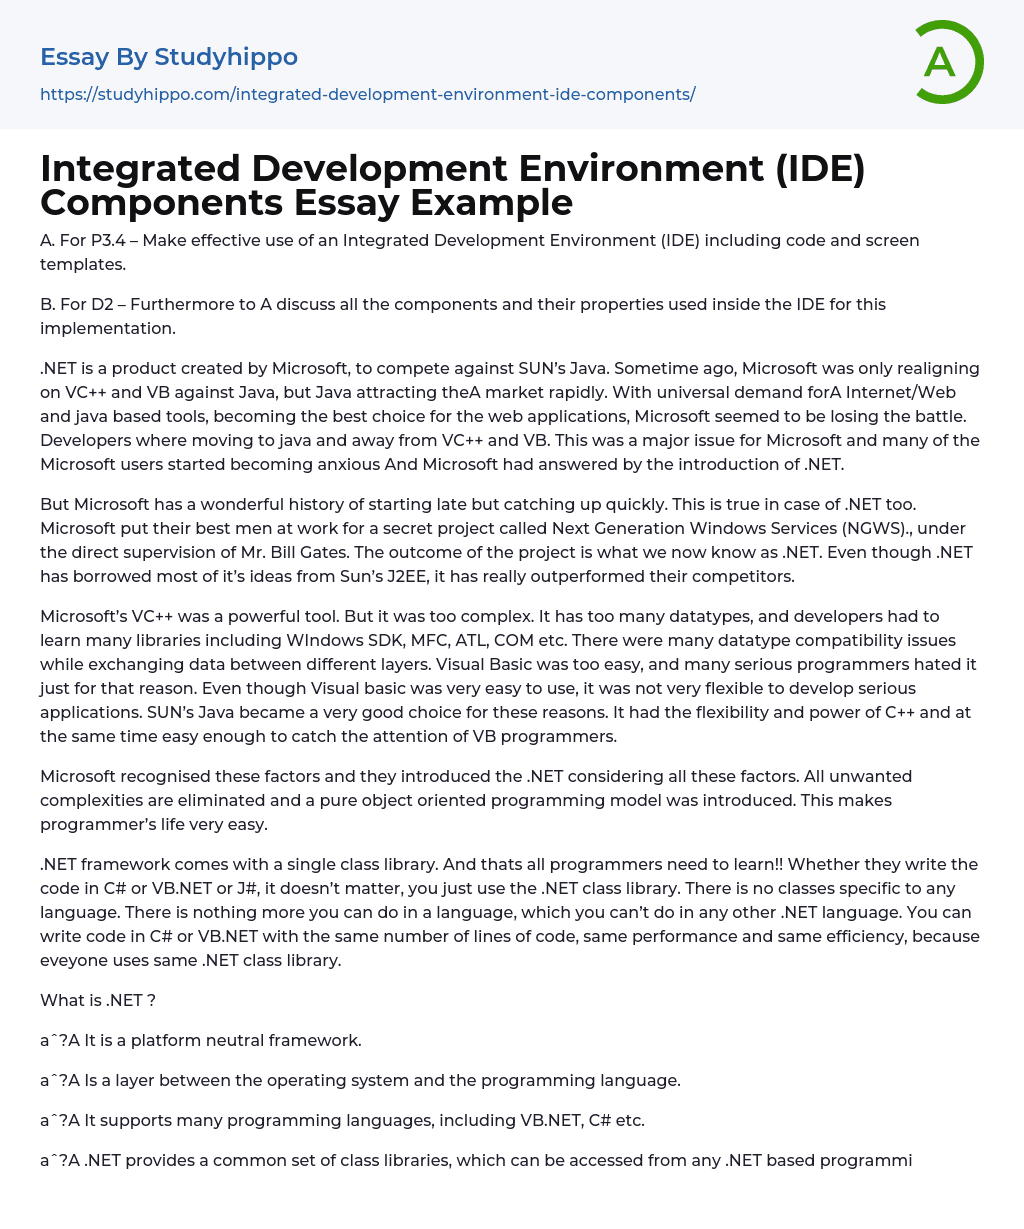 Integrated Development Environment (IDE) Components Essay Example